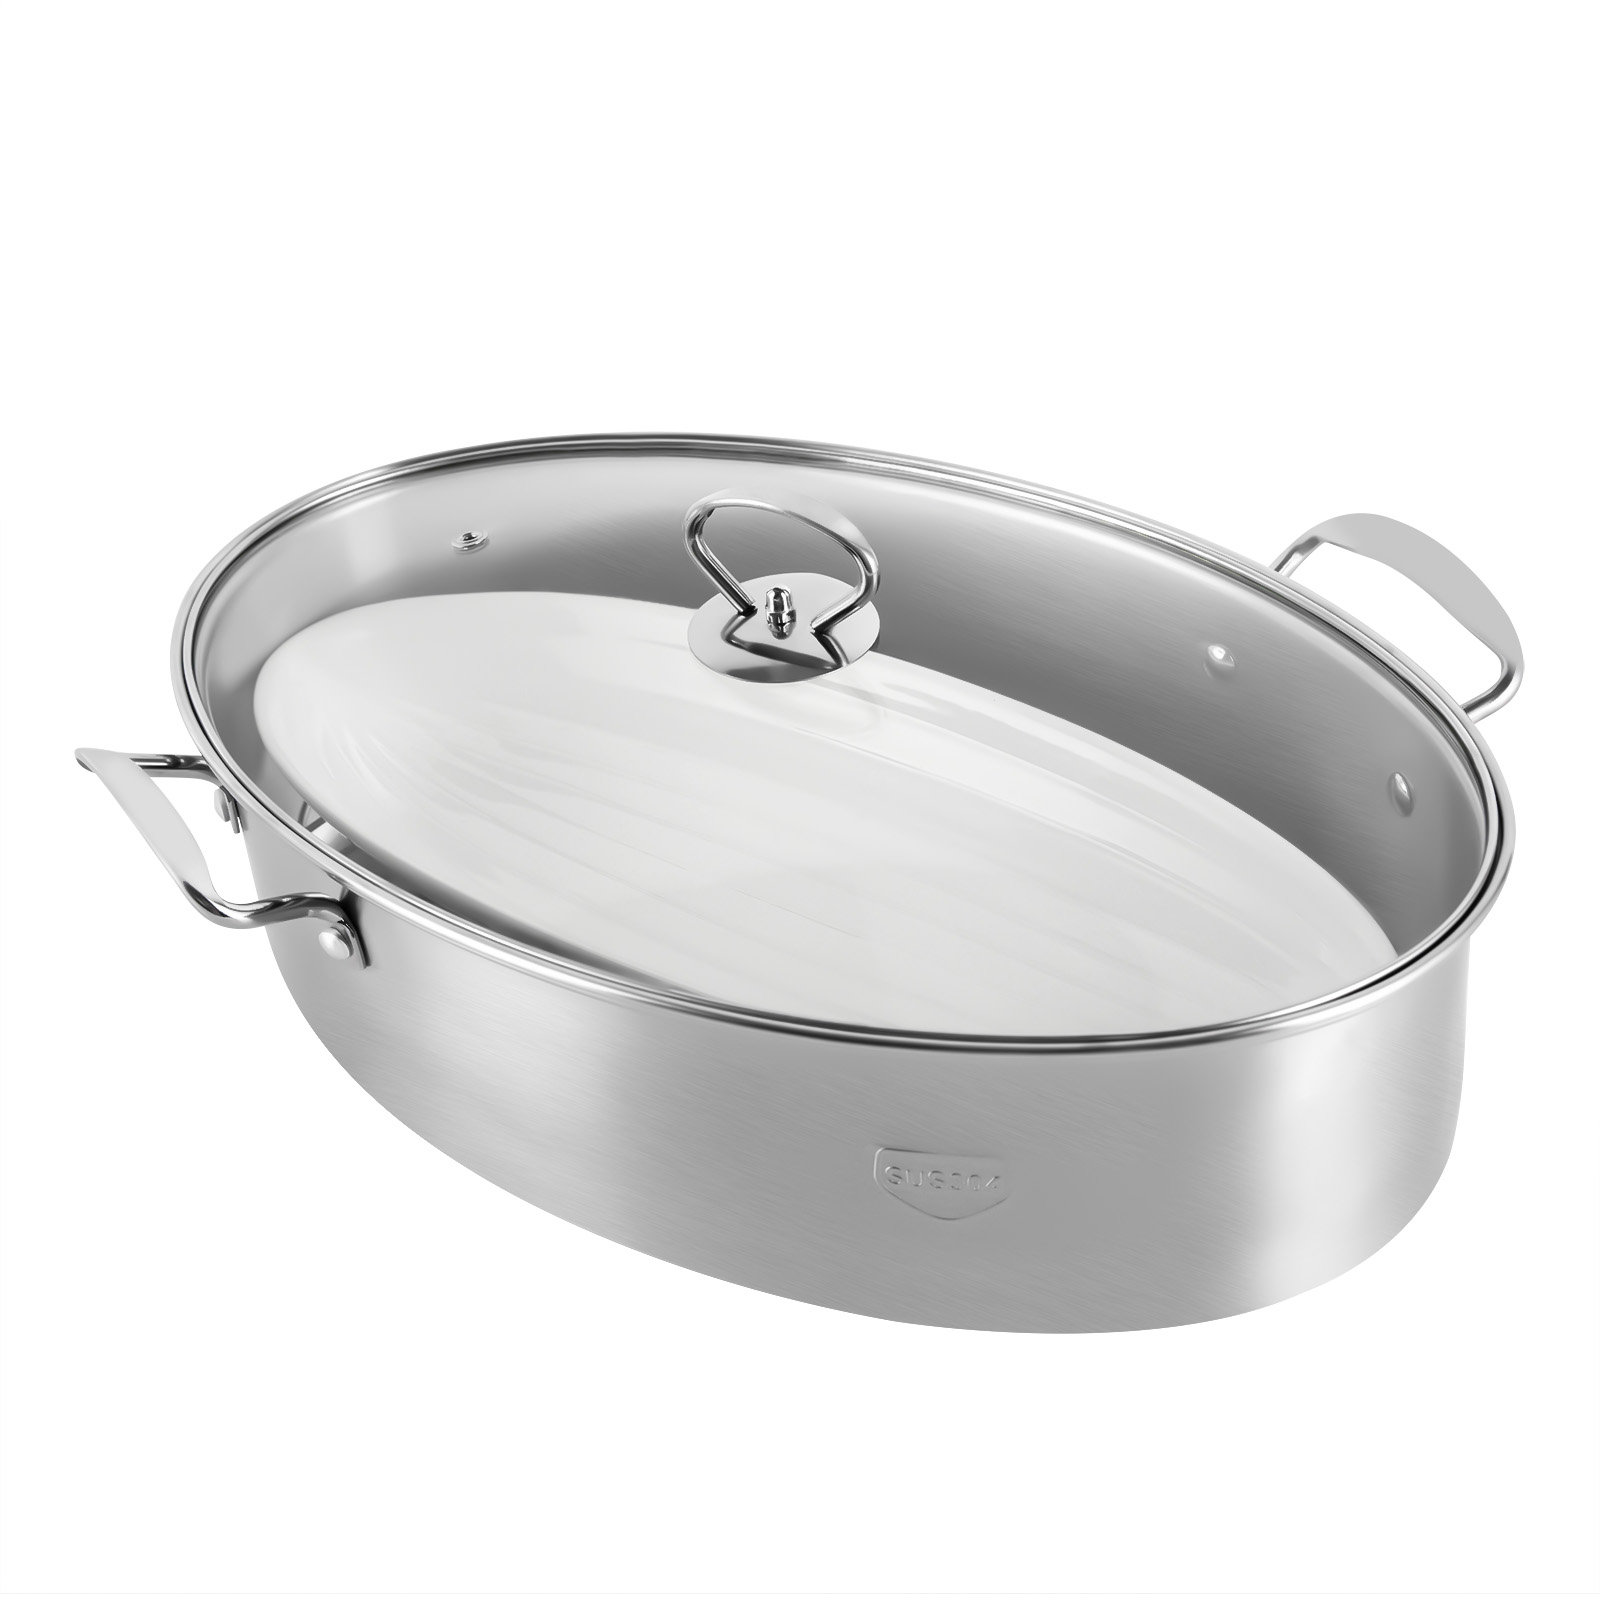 Sus304 Stainless Steel Steamer Pot For Home Use, Suitable For Soup